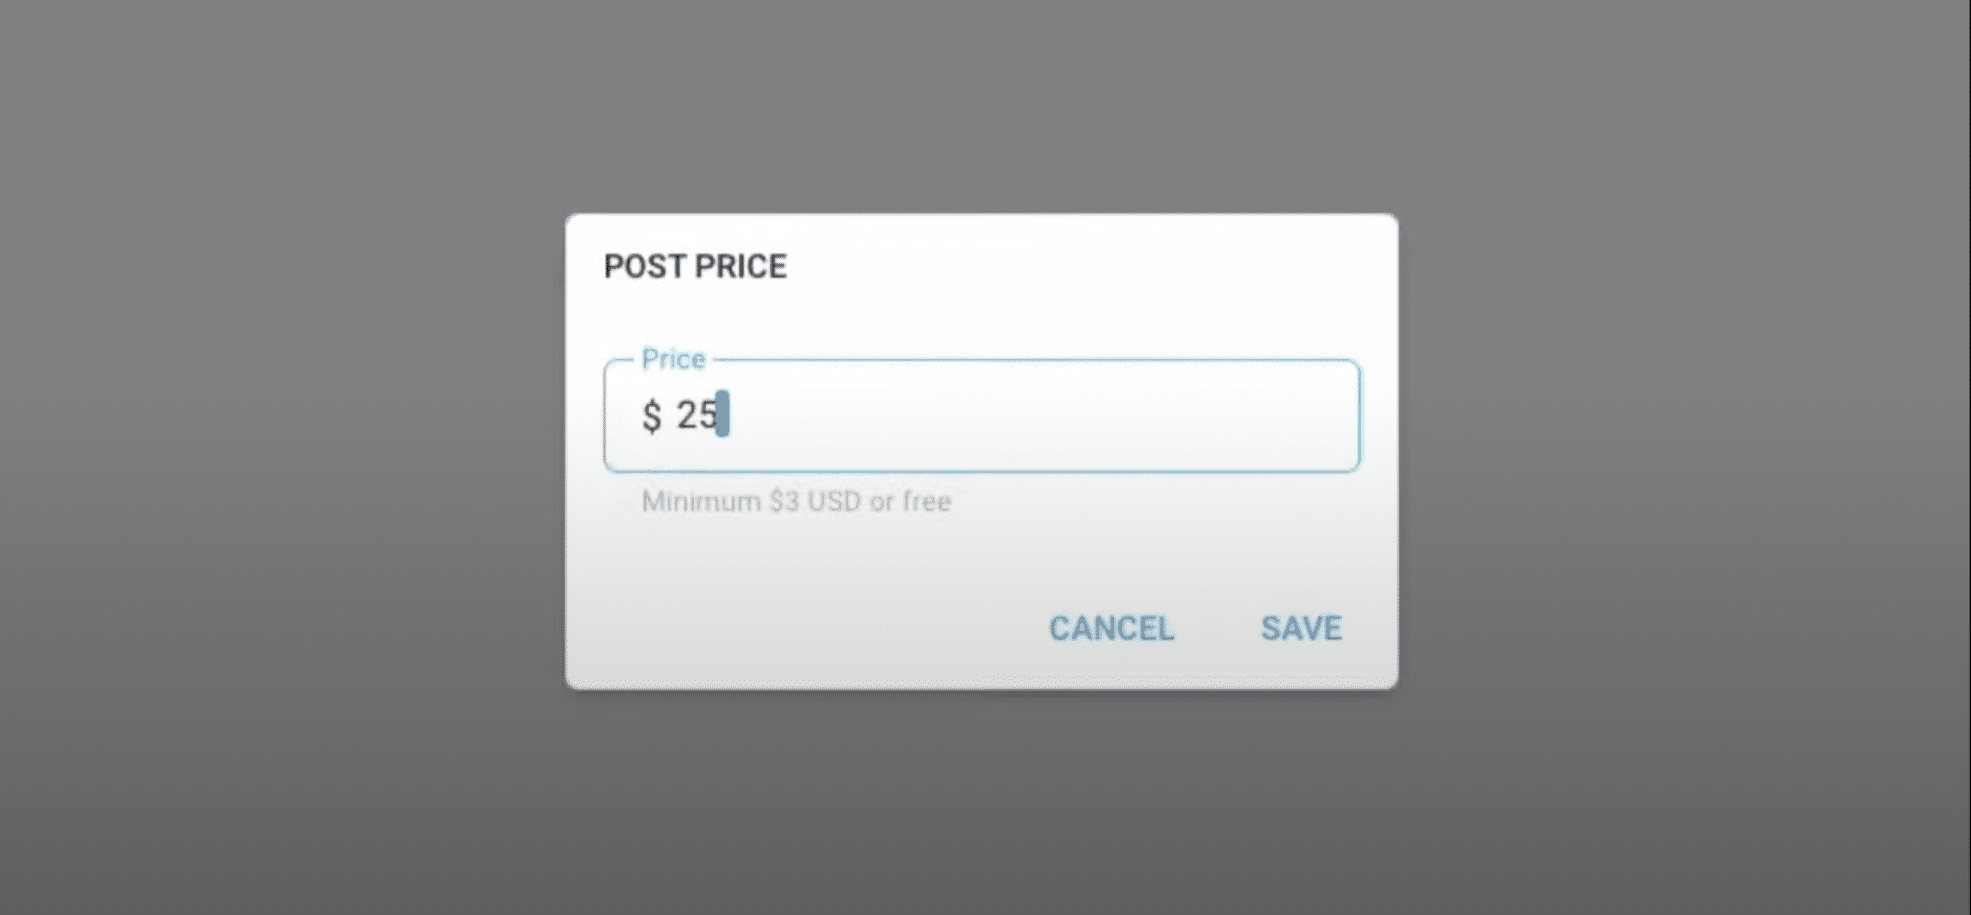 type in your price